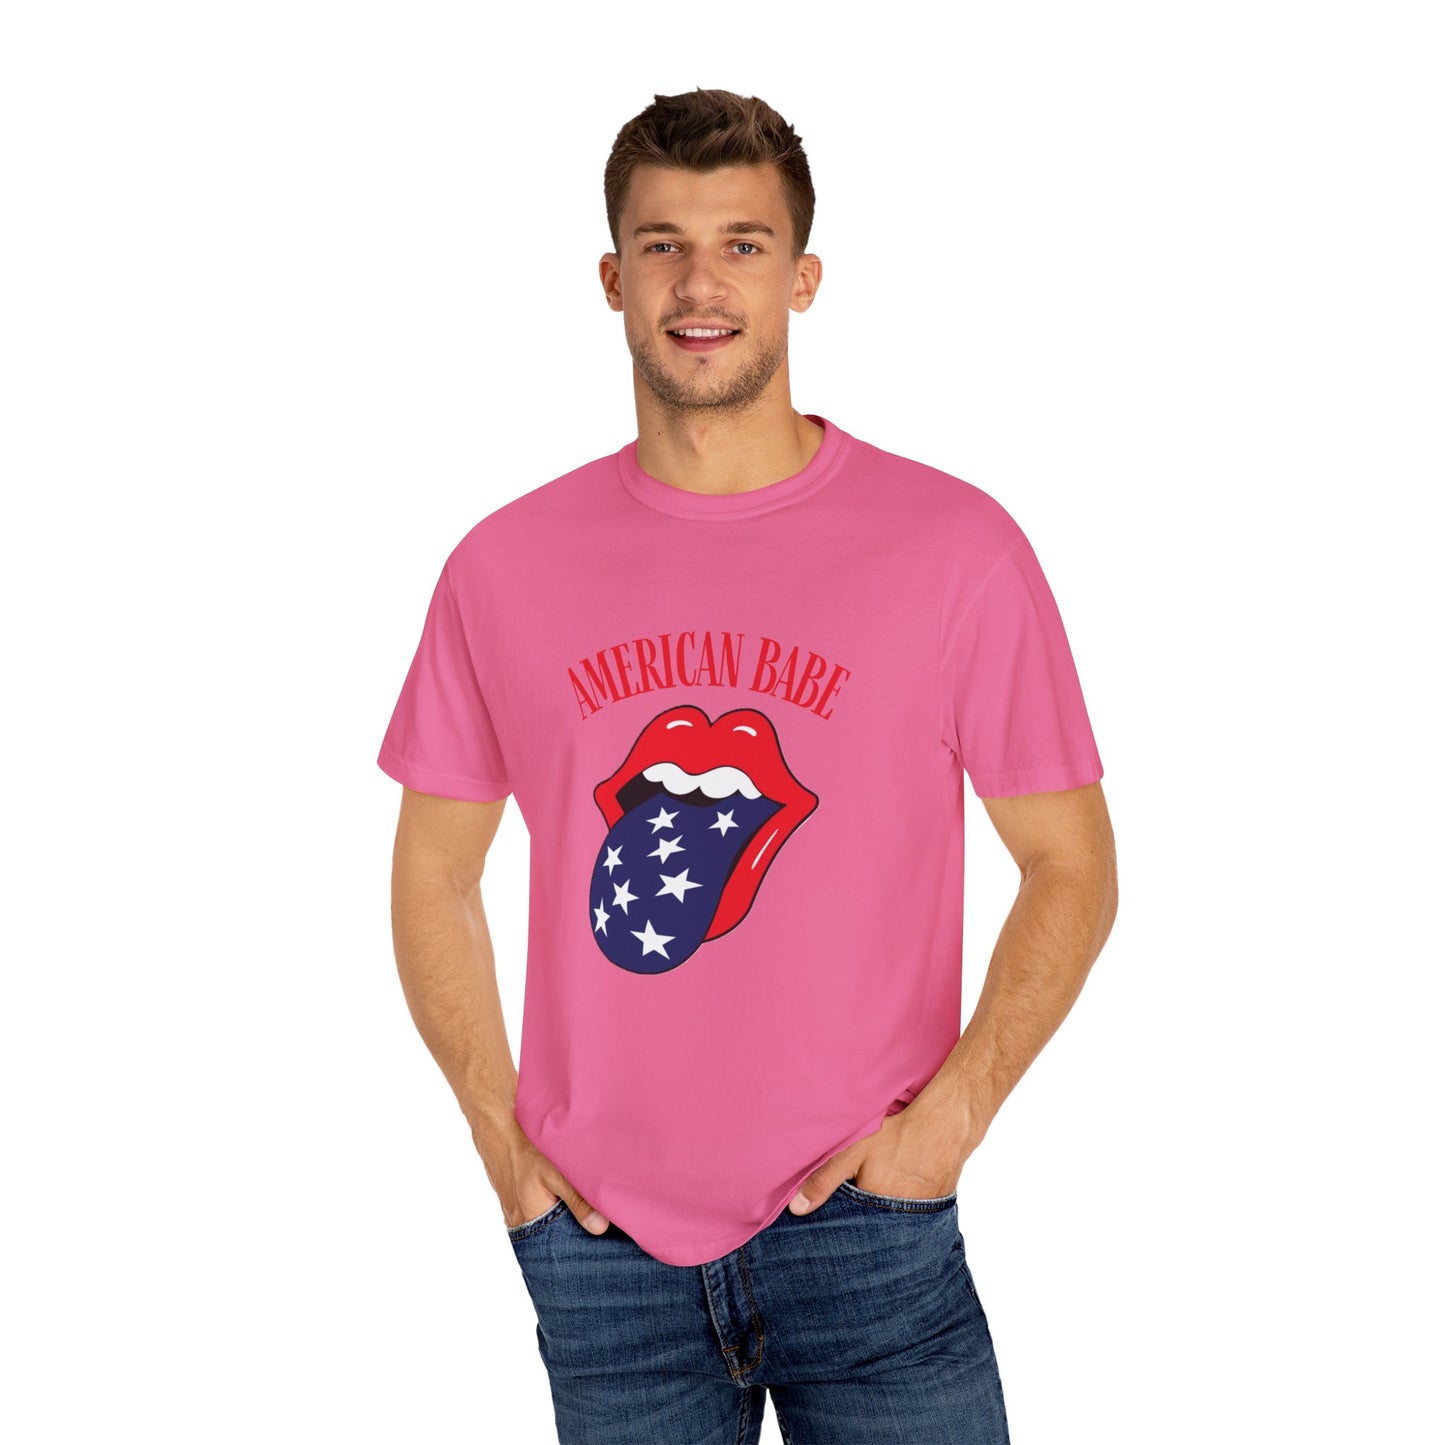 American Babe Comfort Colors T-shirt